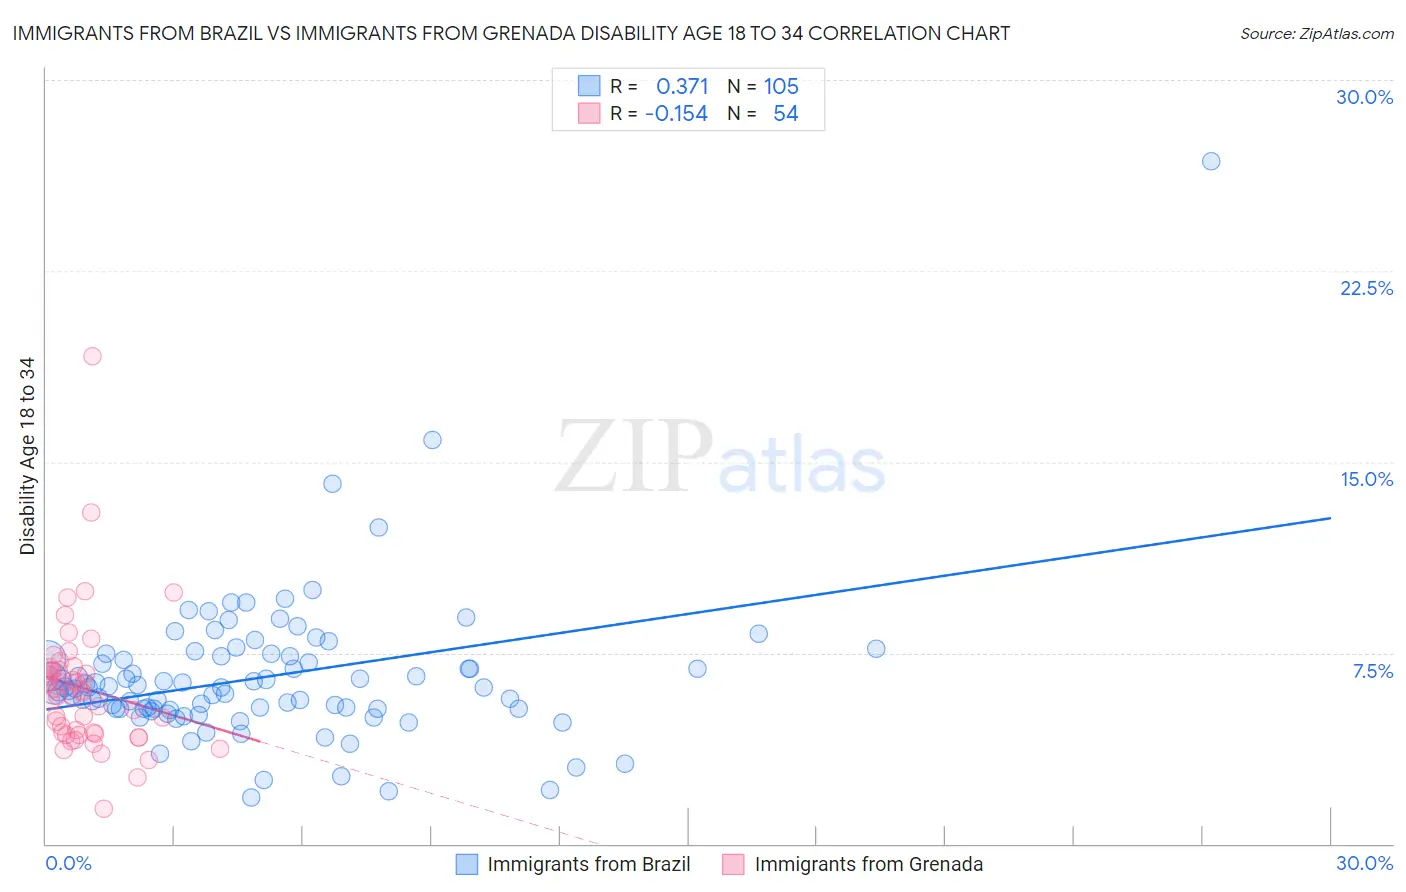 Immigrants from Brazil vs Immigrants from Grenada Disability Age 18 to 34